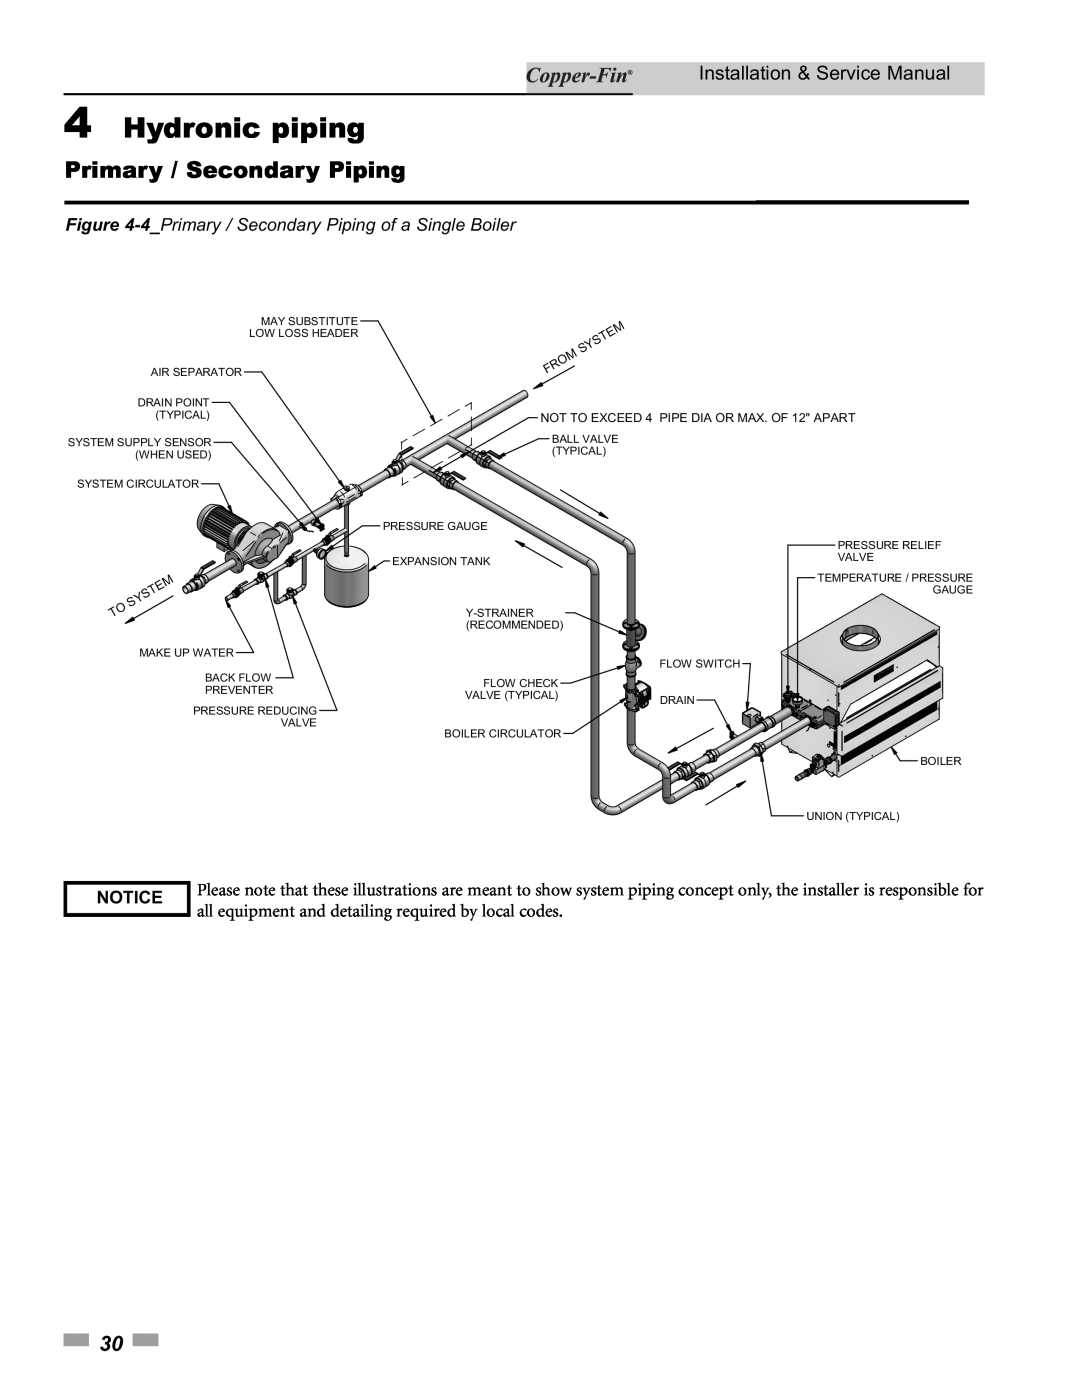 Lochinvar 500, 90 service manual Primary / Secondary Piping, 4Hydronic piping, Installation & Service Manual, Notice 